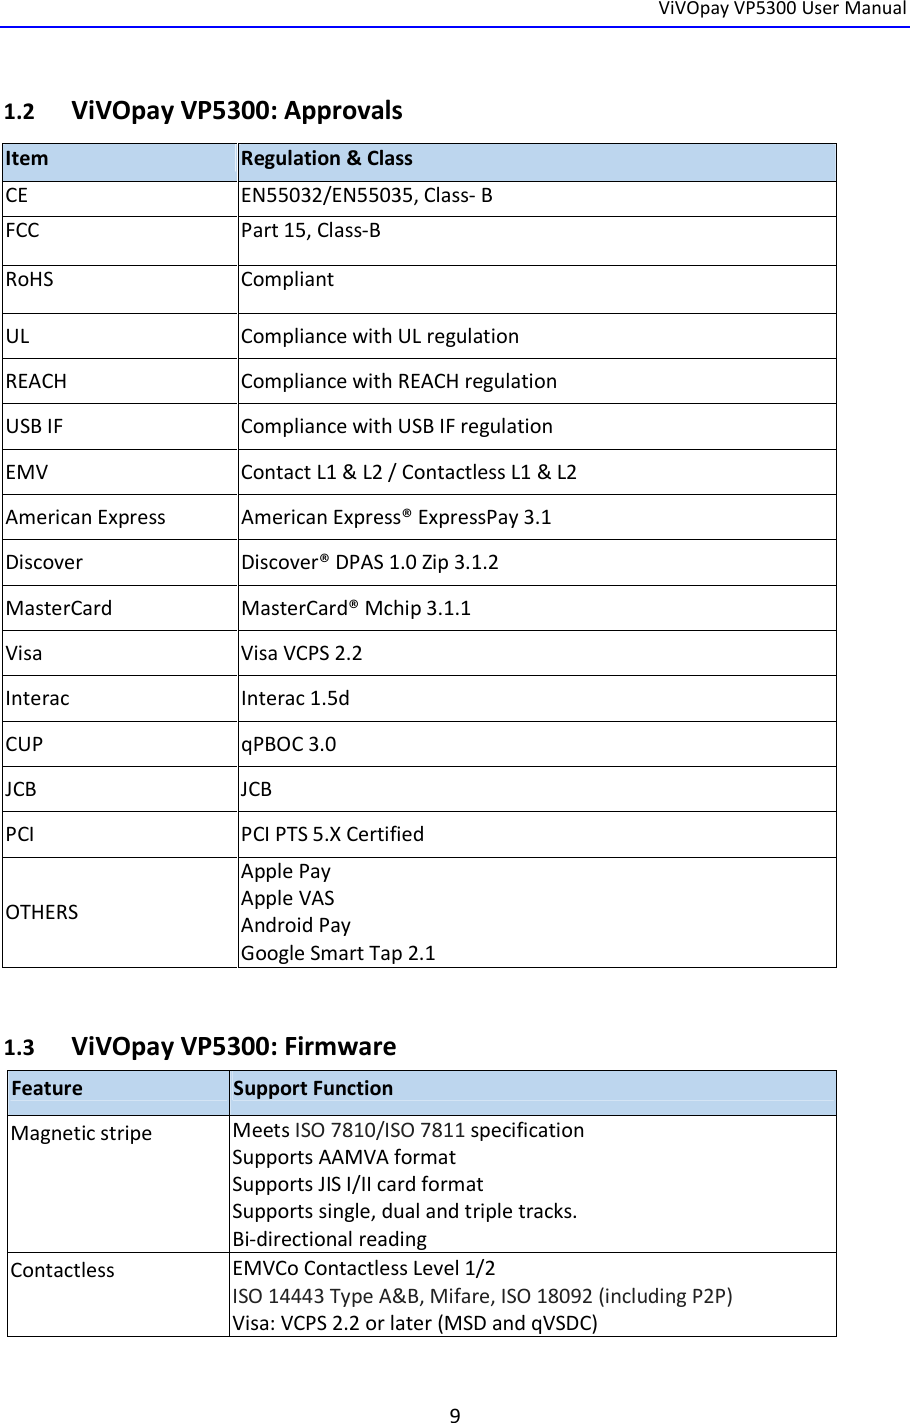  ViVOpay VP5300 User Manual   9  1.2 ViVOpay VP5300: Approvals                                 1.3 ViVOpay VP5300: Firmware  Feature  Support Function Magnetic stripe Meets ISO 7810/ISO 7811 specification Supports AAMVA format Supports JIS I/II card format  Supports single, dual and triple tracks. Bi-directional reading Contactless  EMVCo Contactless Level 1/2 ISO 14443 Type A&amp;B, Mifare, ISO 18092 (including P2P) Visa: VCPS 2.2 or later (MSD and qVSDC) Item Regulation &amp; Class CE EN55032/EN55035, Class- B FCC Part 15, Class-B RoHS Compliant  UL  Compliance with UL regulation REACH  Compliance with REACH regulation USB IF  Compliance with USB IF regulation EMV  Contact L1 &amp; L2 / Contactless L1 &amp; L2 American Express  American Express® ExpressPay 3.1 Discover  Discover® DPAS 1.0 Zip 3.1.2 MasterCard  MasterCard® Mchip 3.1.1 Visa  Visa VCPS 2.2 Interac  Interac 1.5d CUP  qPBOC 3.0 JCB  JCB PCI  PCI PTS 5.X Certified OTHERS Apple Pay Apple VAS Android Pay Google Smart Tap 2.1 